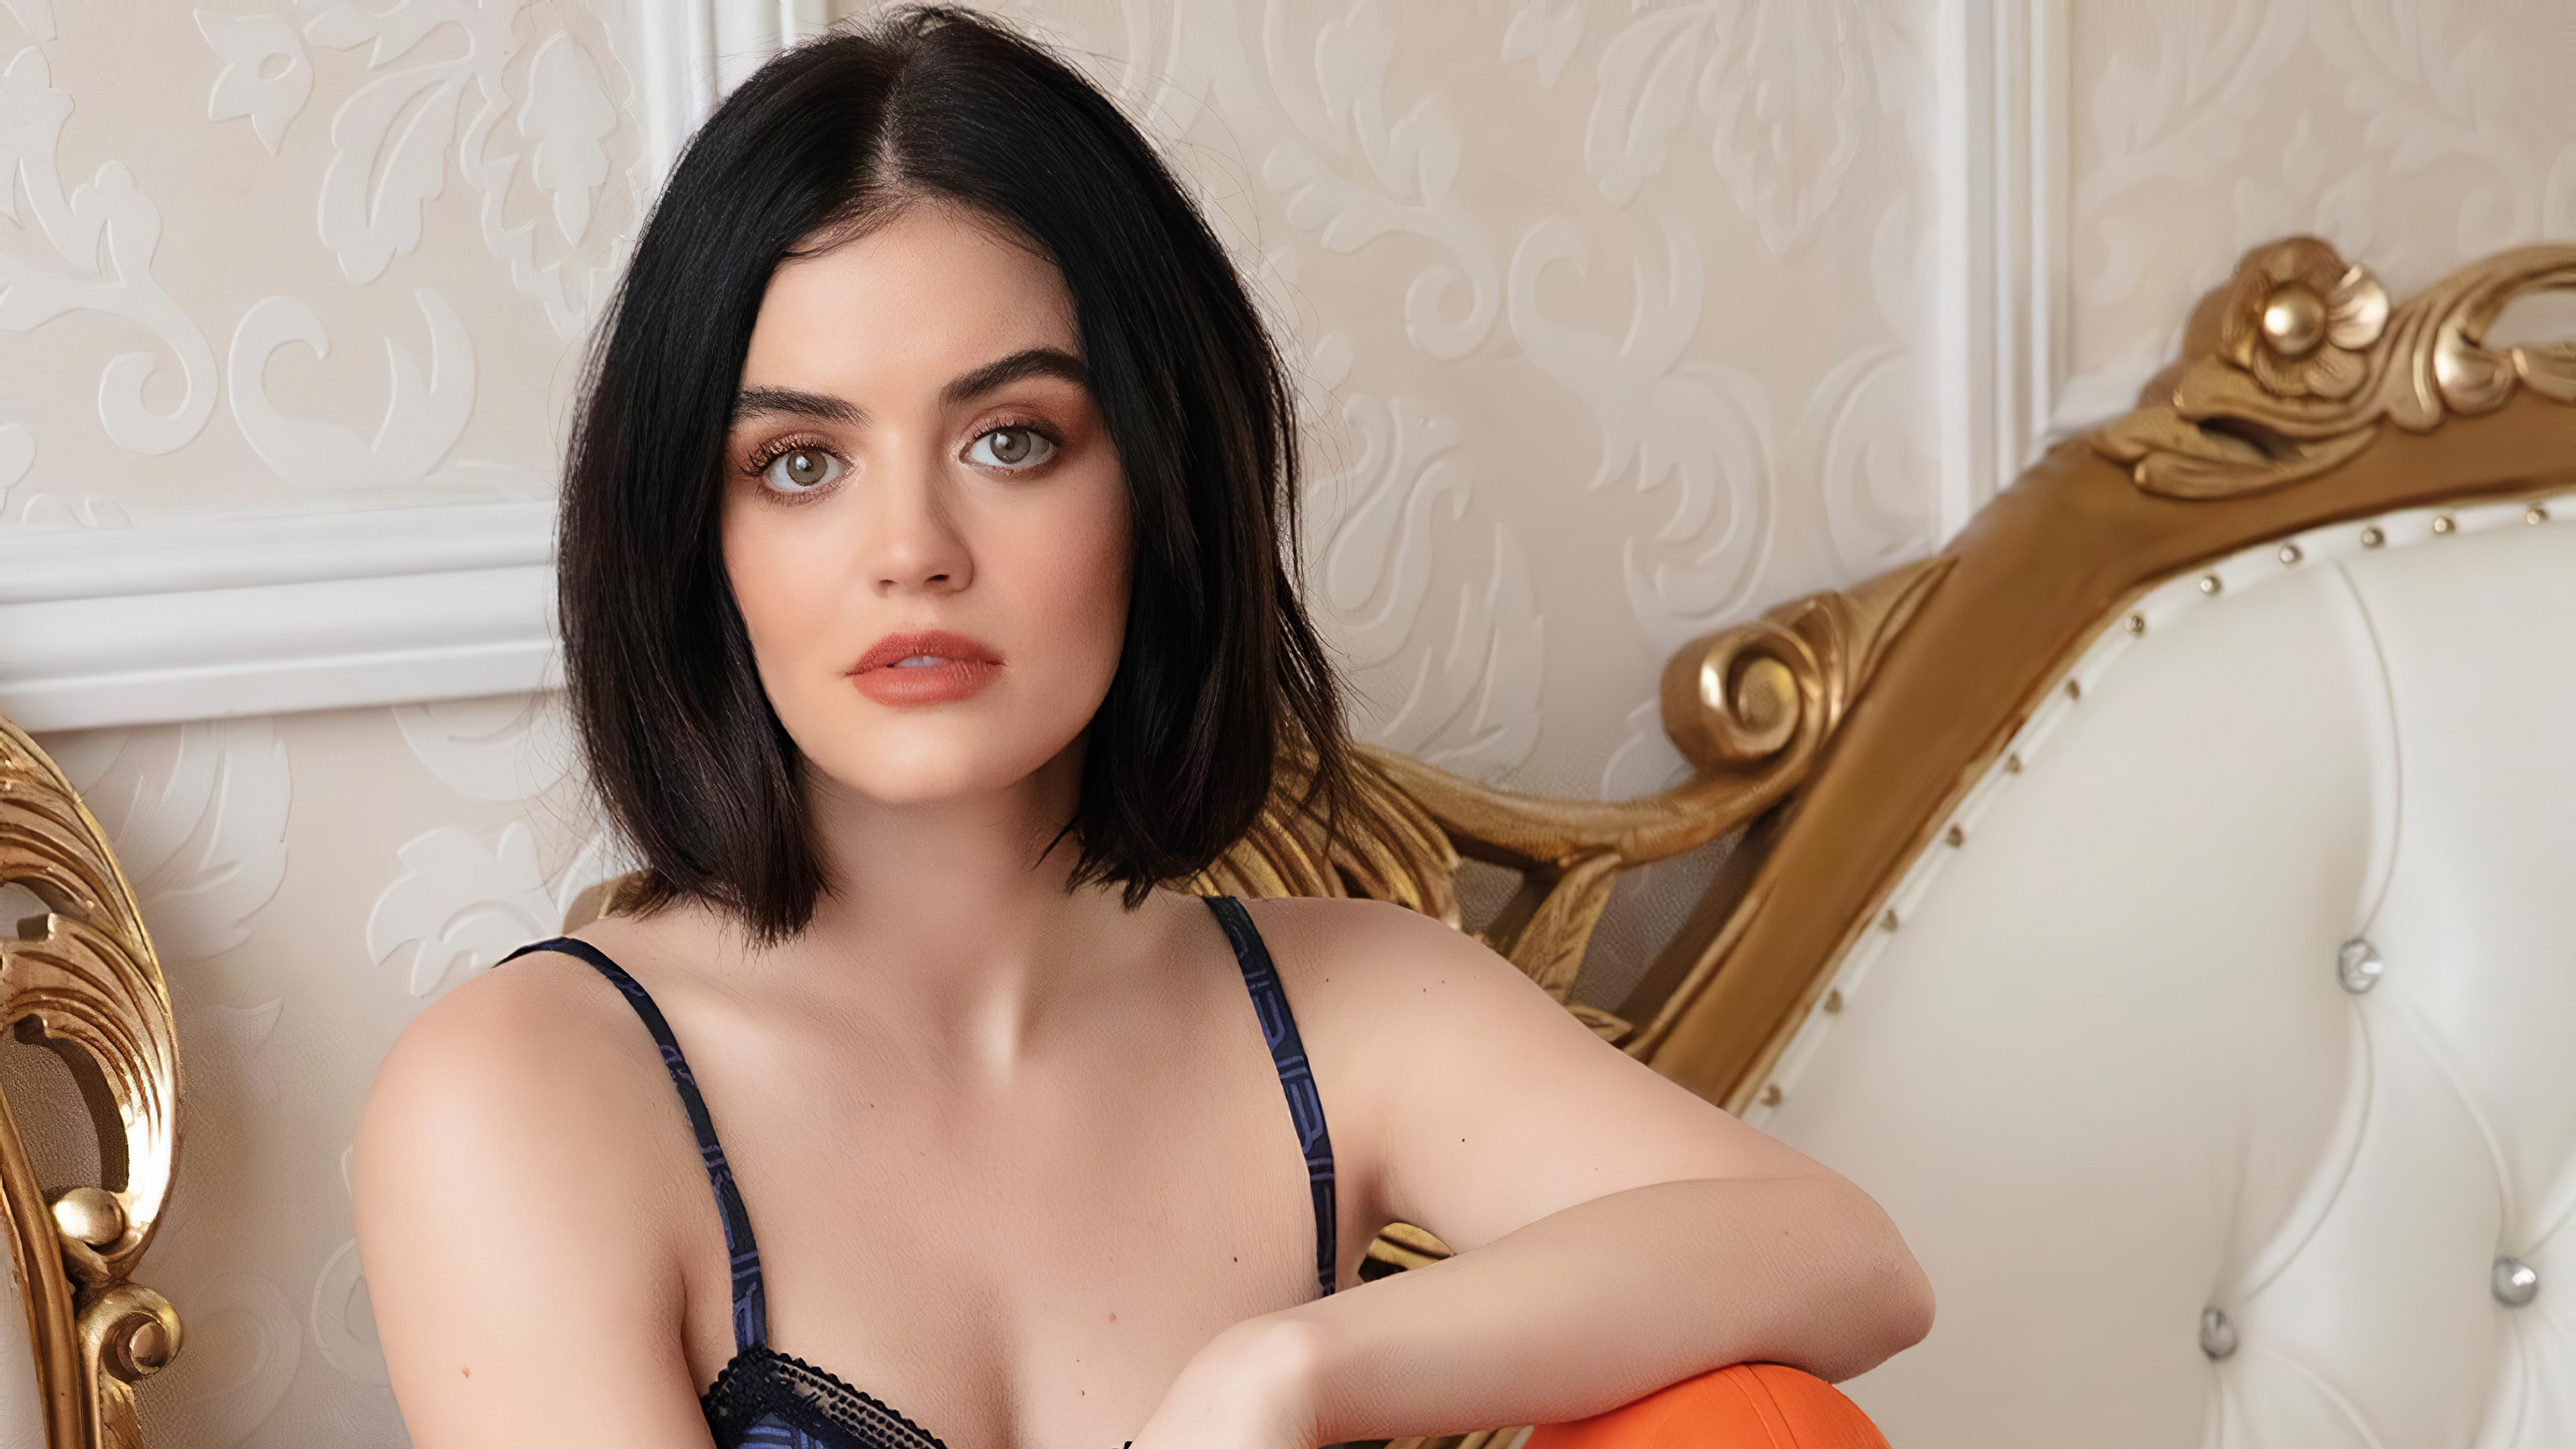 Lucy Hale 2020 Wallpapers